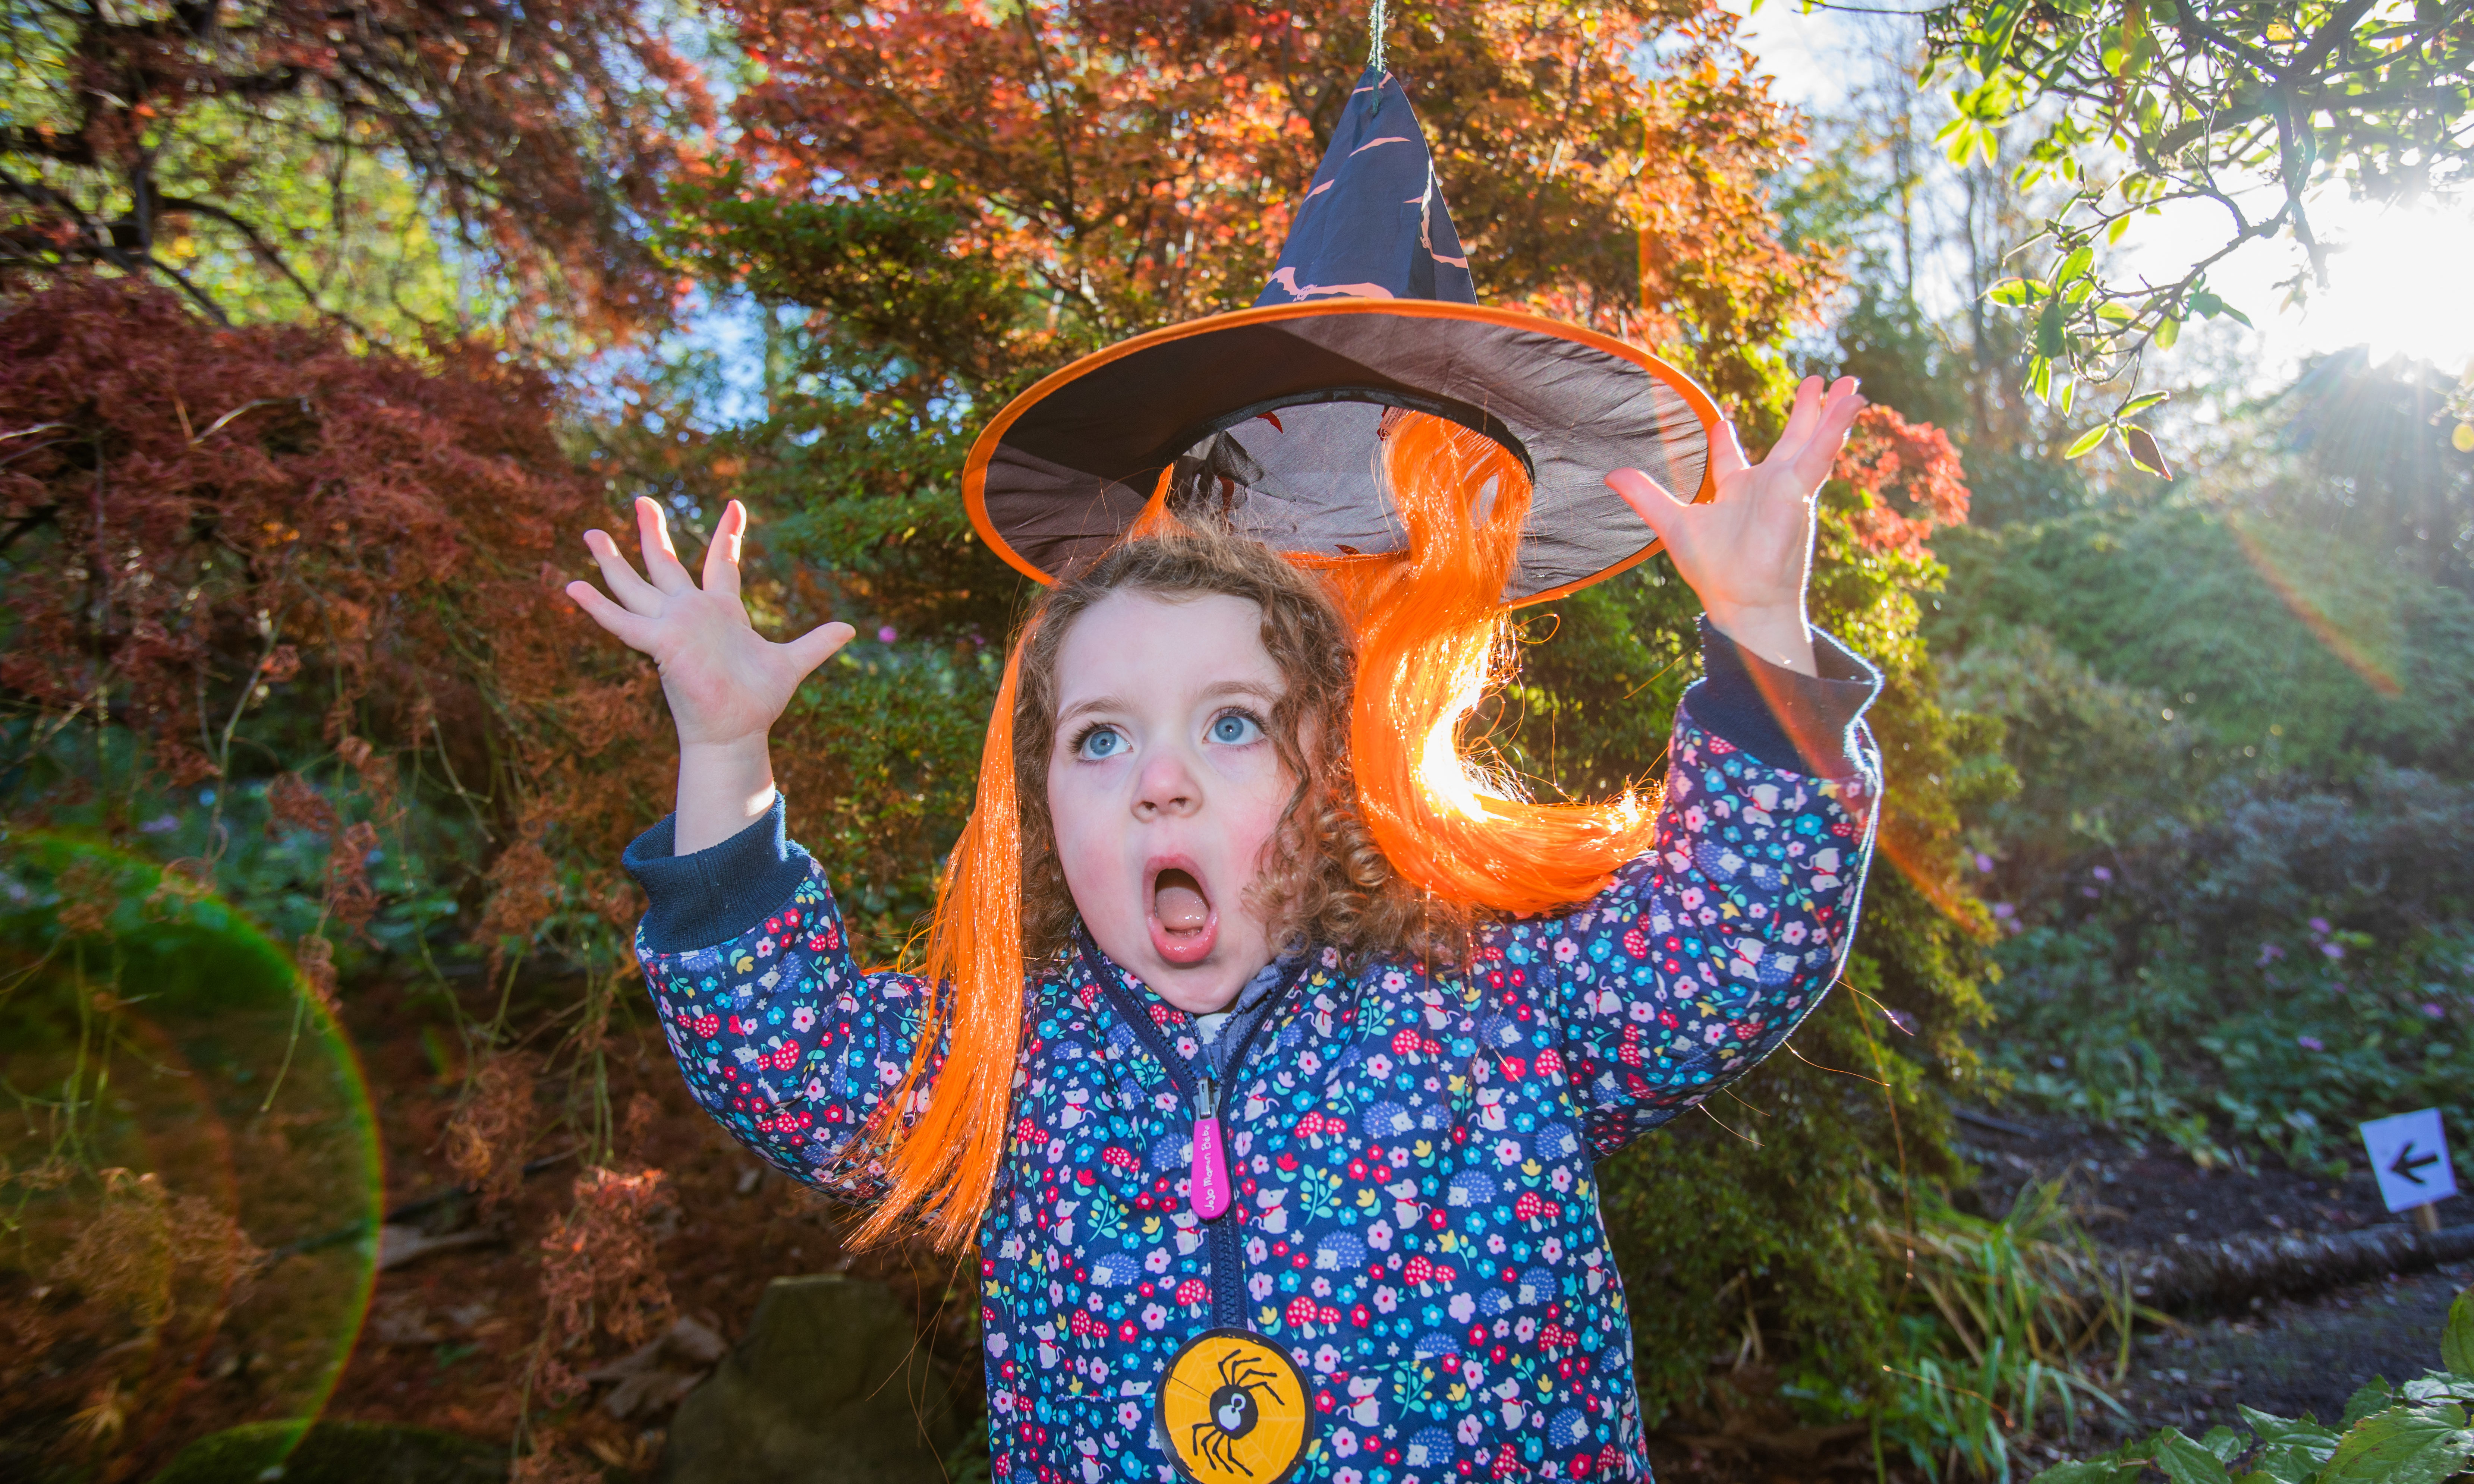 Ailsa Shaw aged 3, from Alyth enjoying her spooky visit to Branklyn Garden